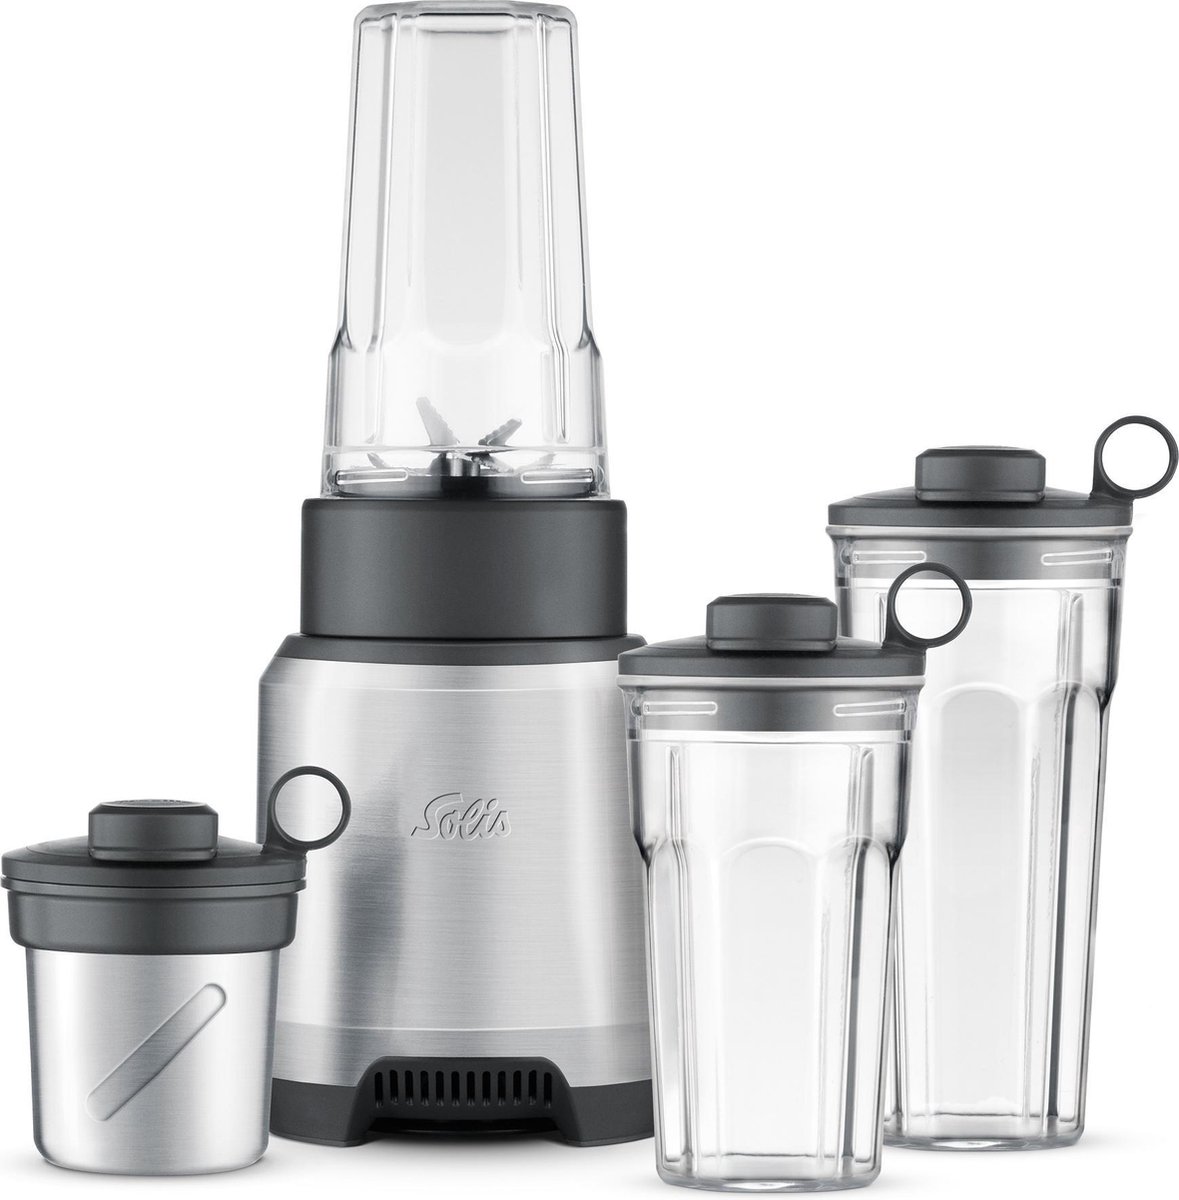 Solis Power Blender To Go 8325 Inclusief 3 mengbekers